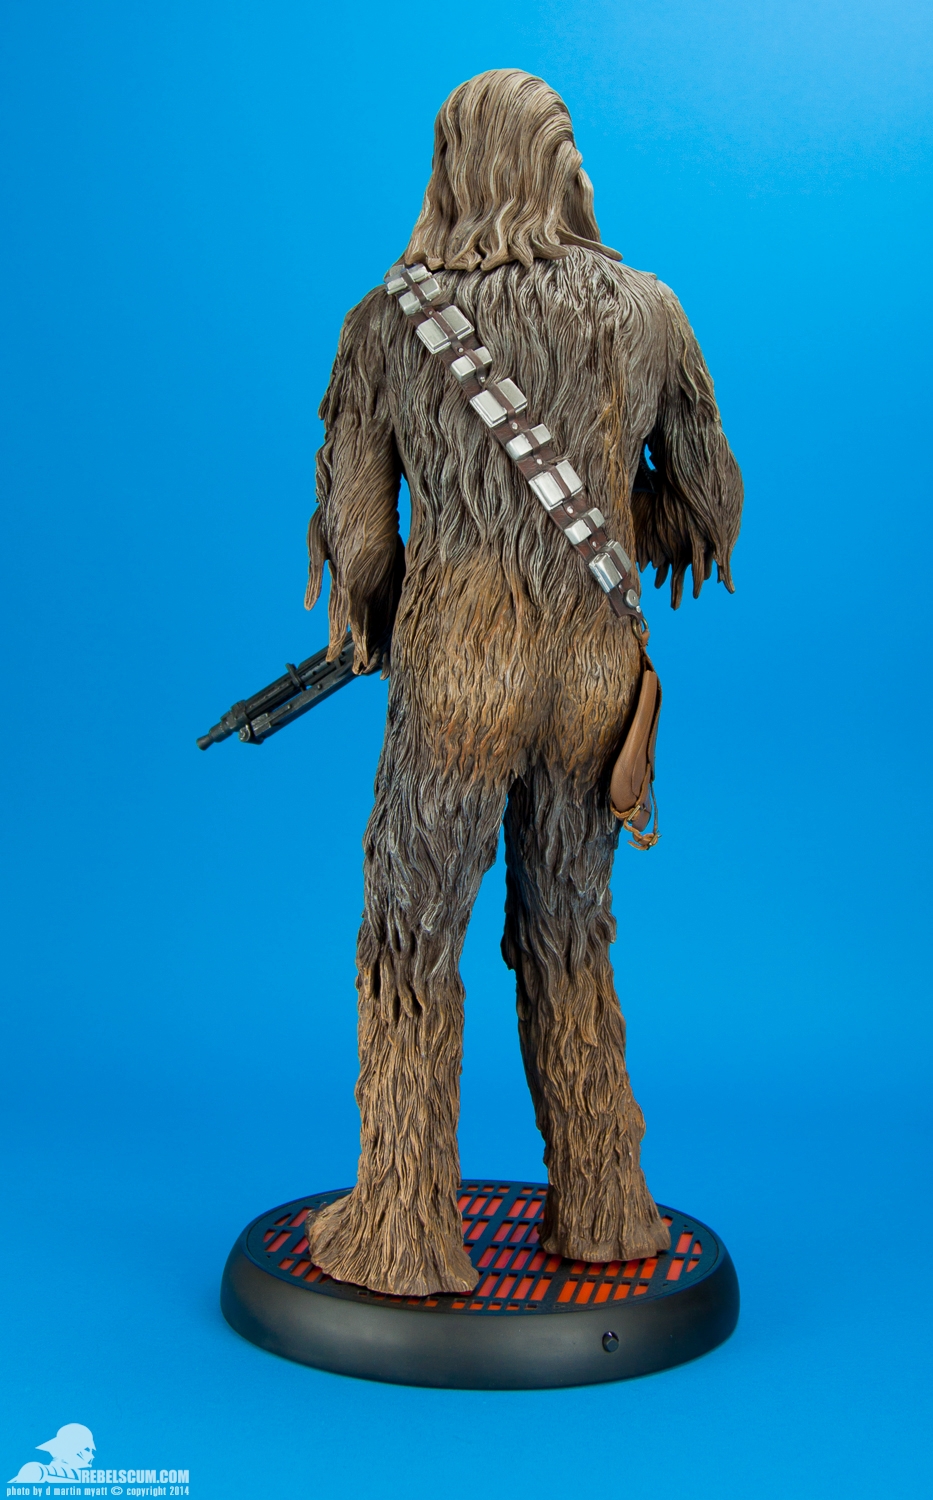 Chewbacca-Premium-Format-Figure-Sideshow-Collectibles-Exclusive-008.jpg